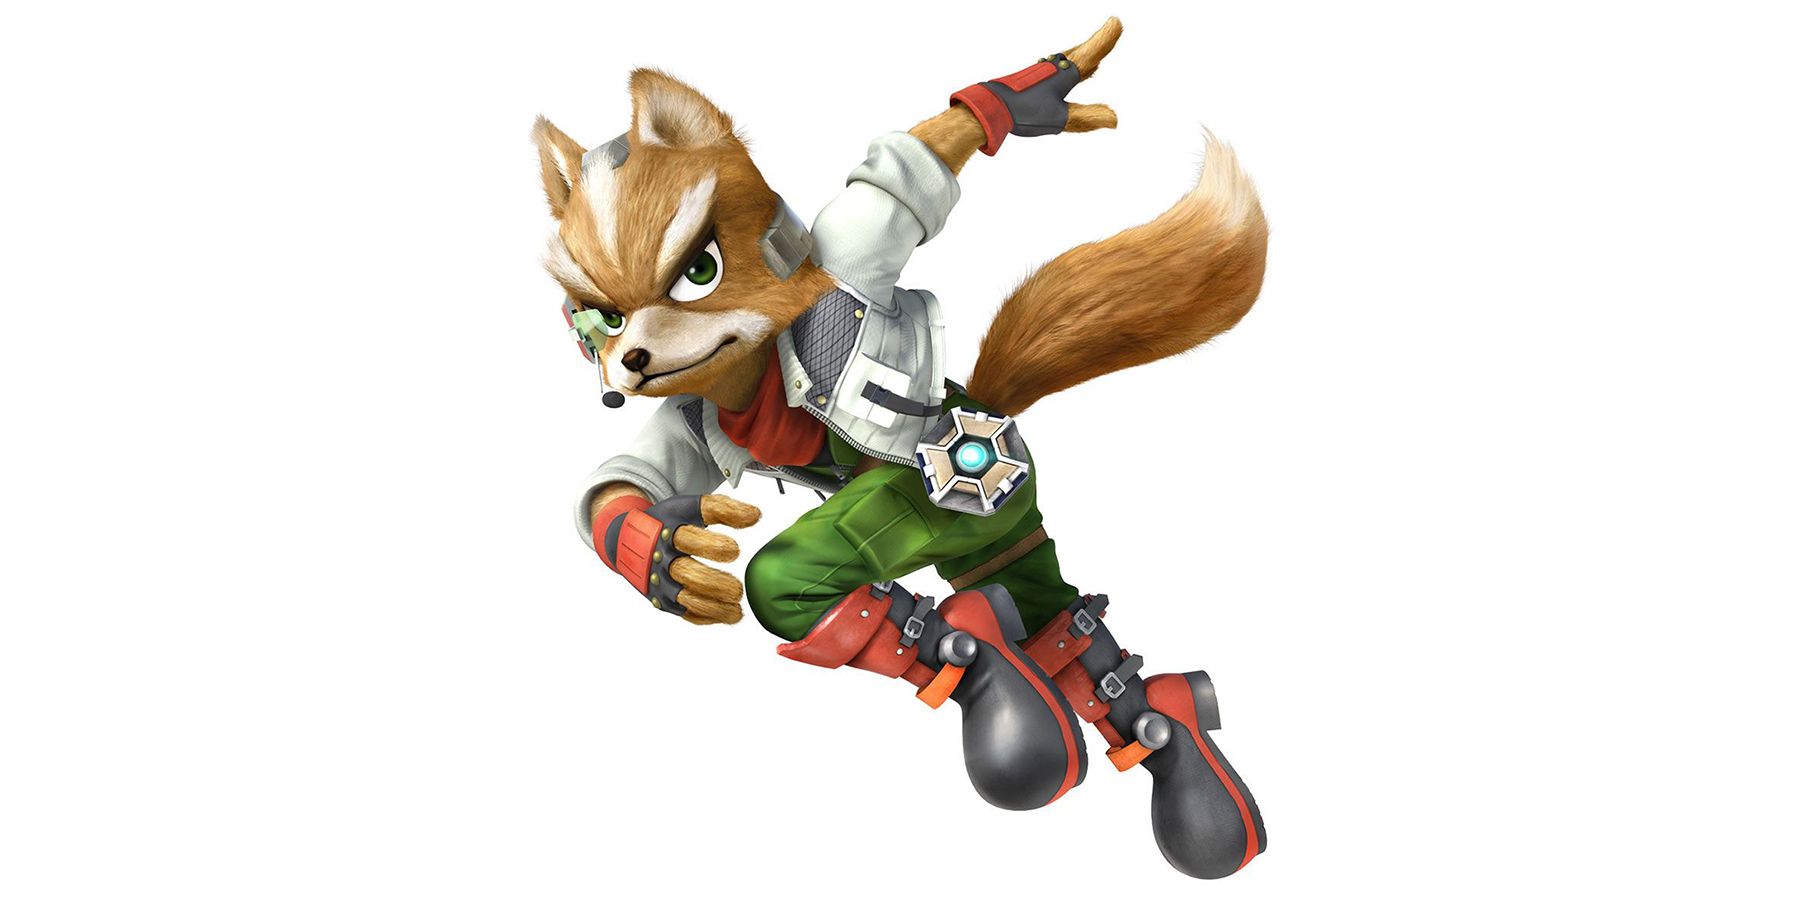 Fox McCloud from Star Fox as he appears in Super Smash Bros.